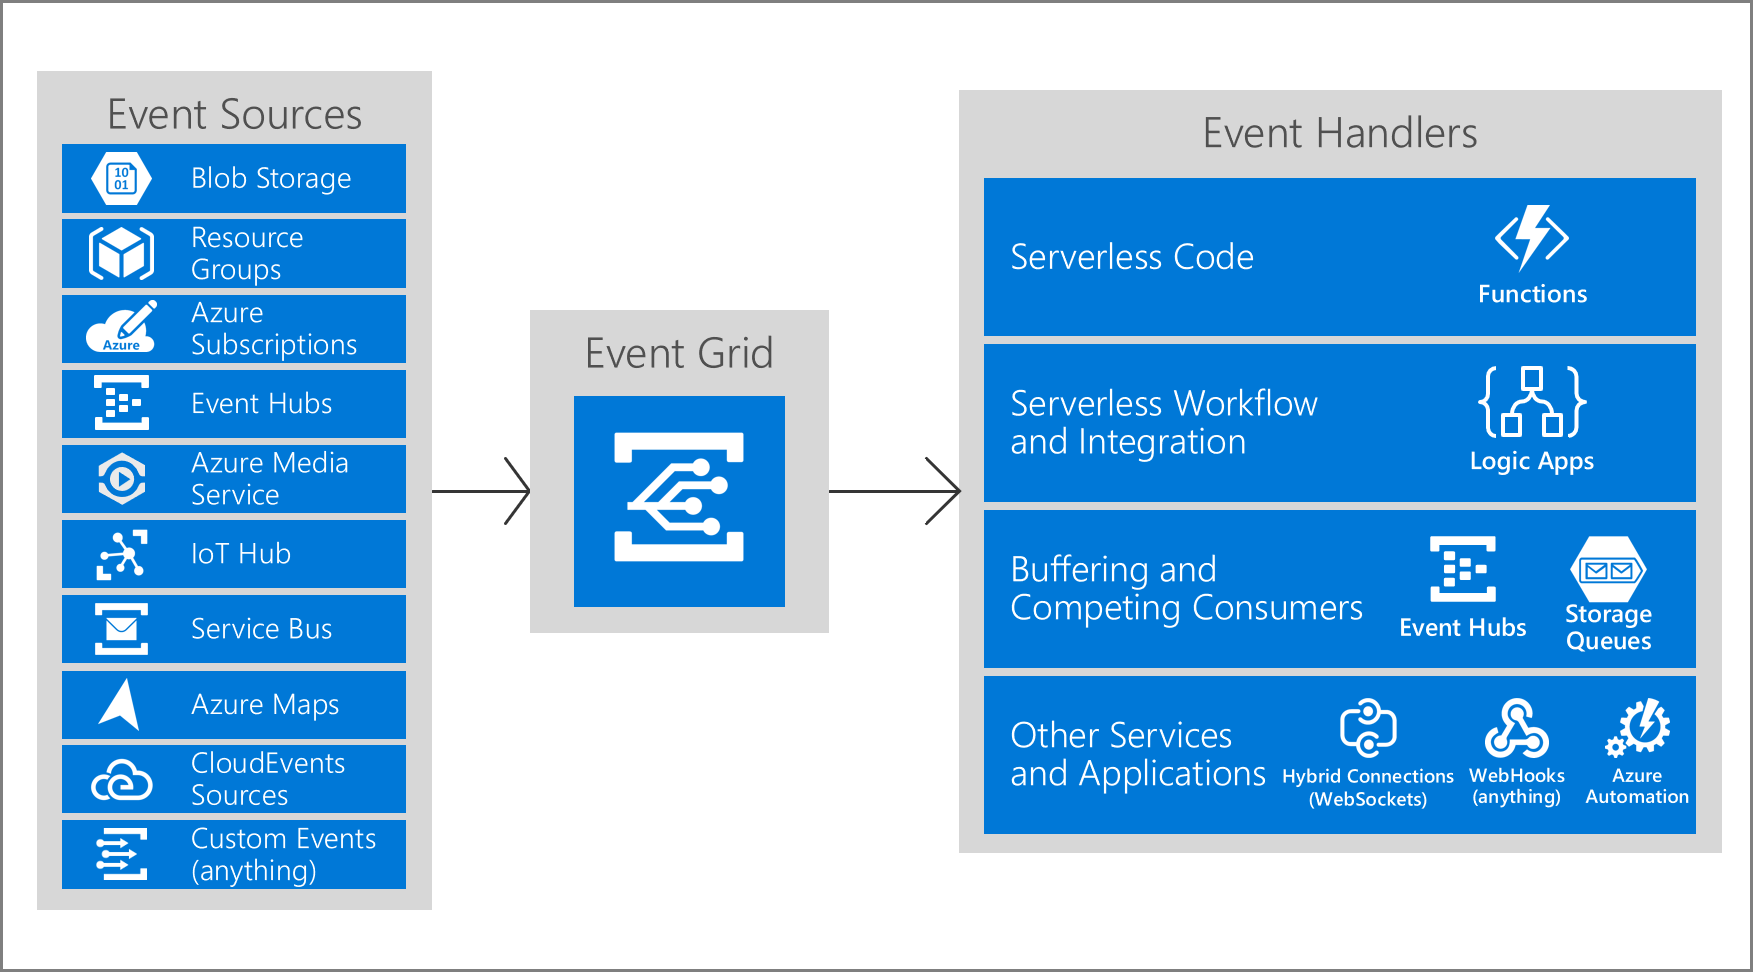 Image showing the Event Grid model of sources and handlers